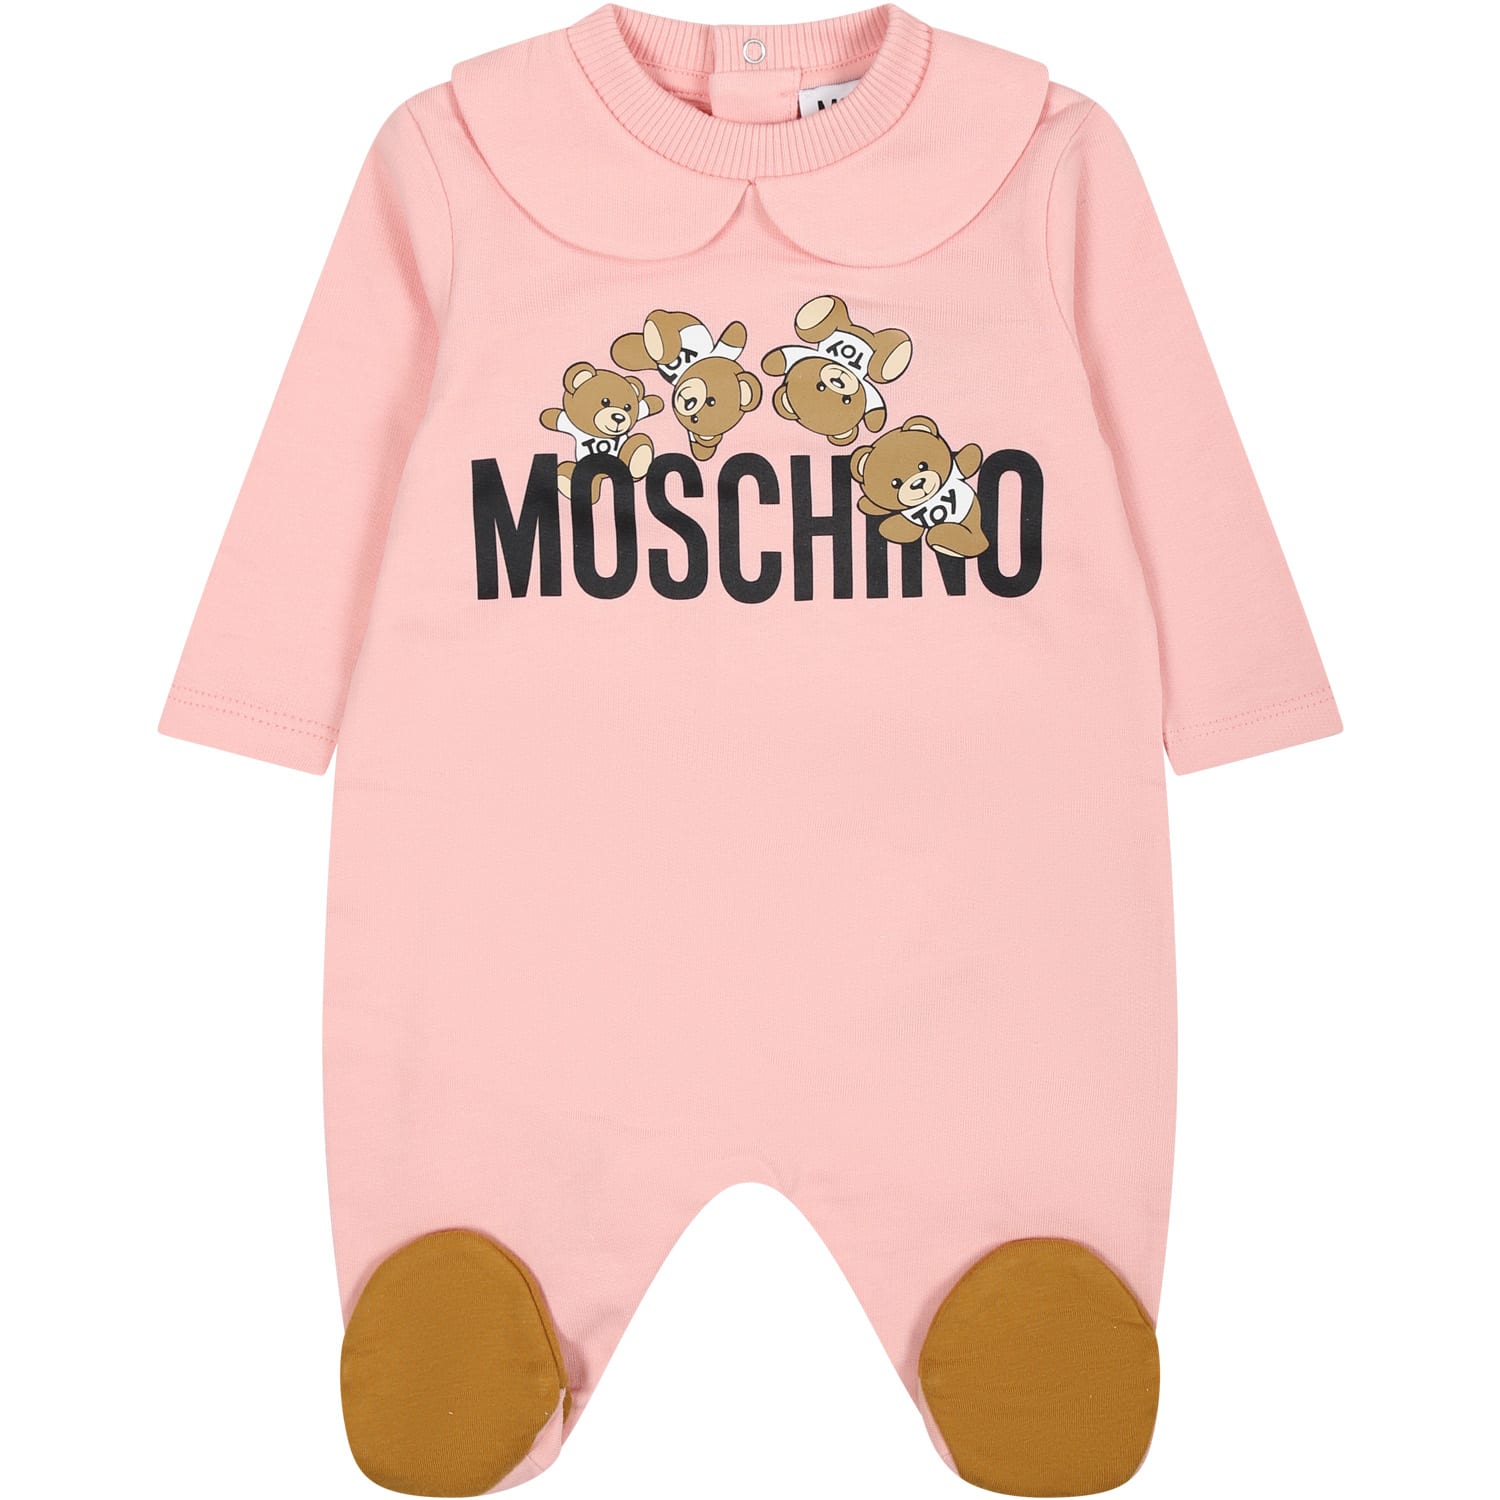 Moschino Pink Jumpsuit For Baby Girl With Logo And Teddy Bear